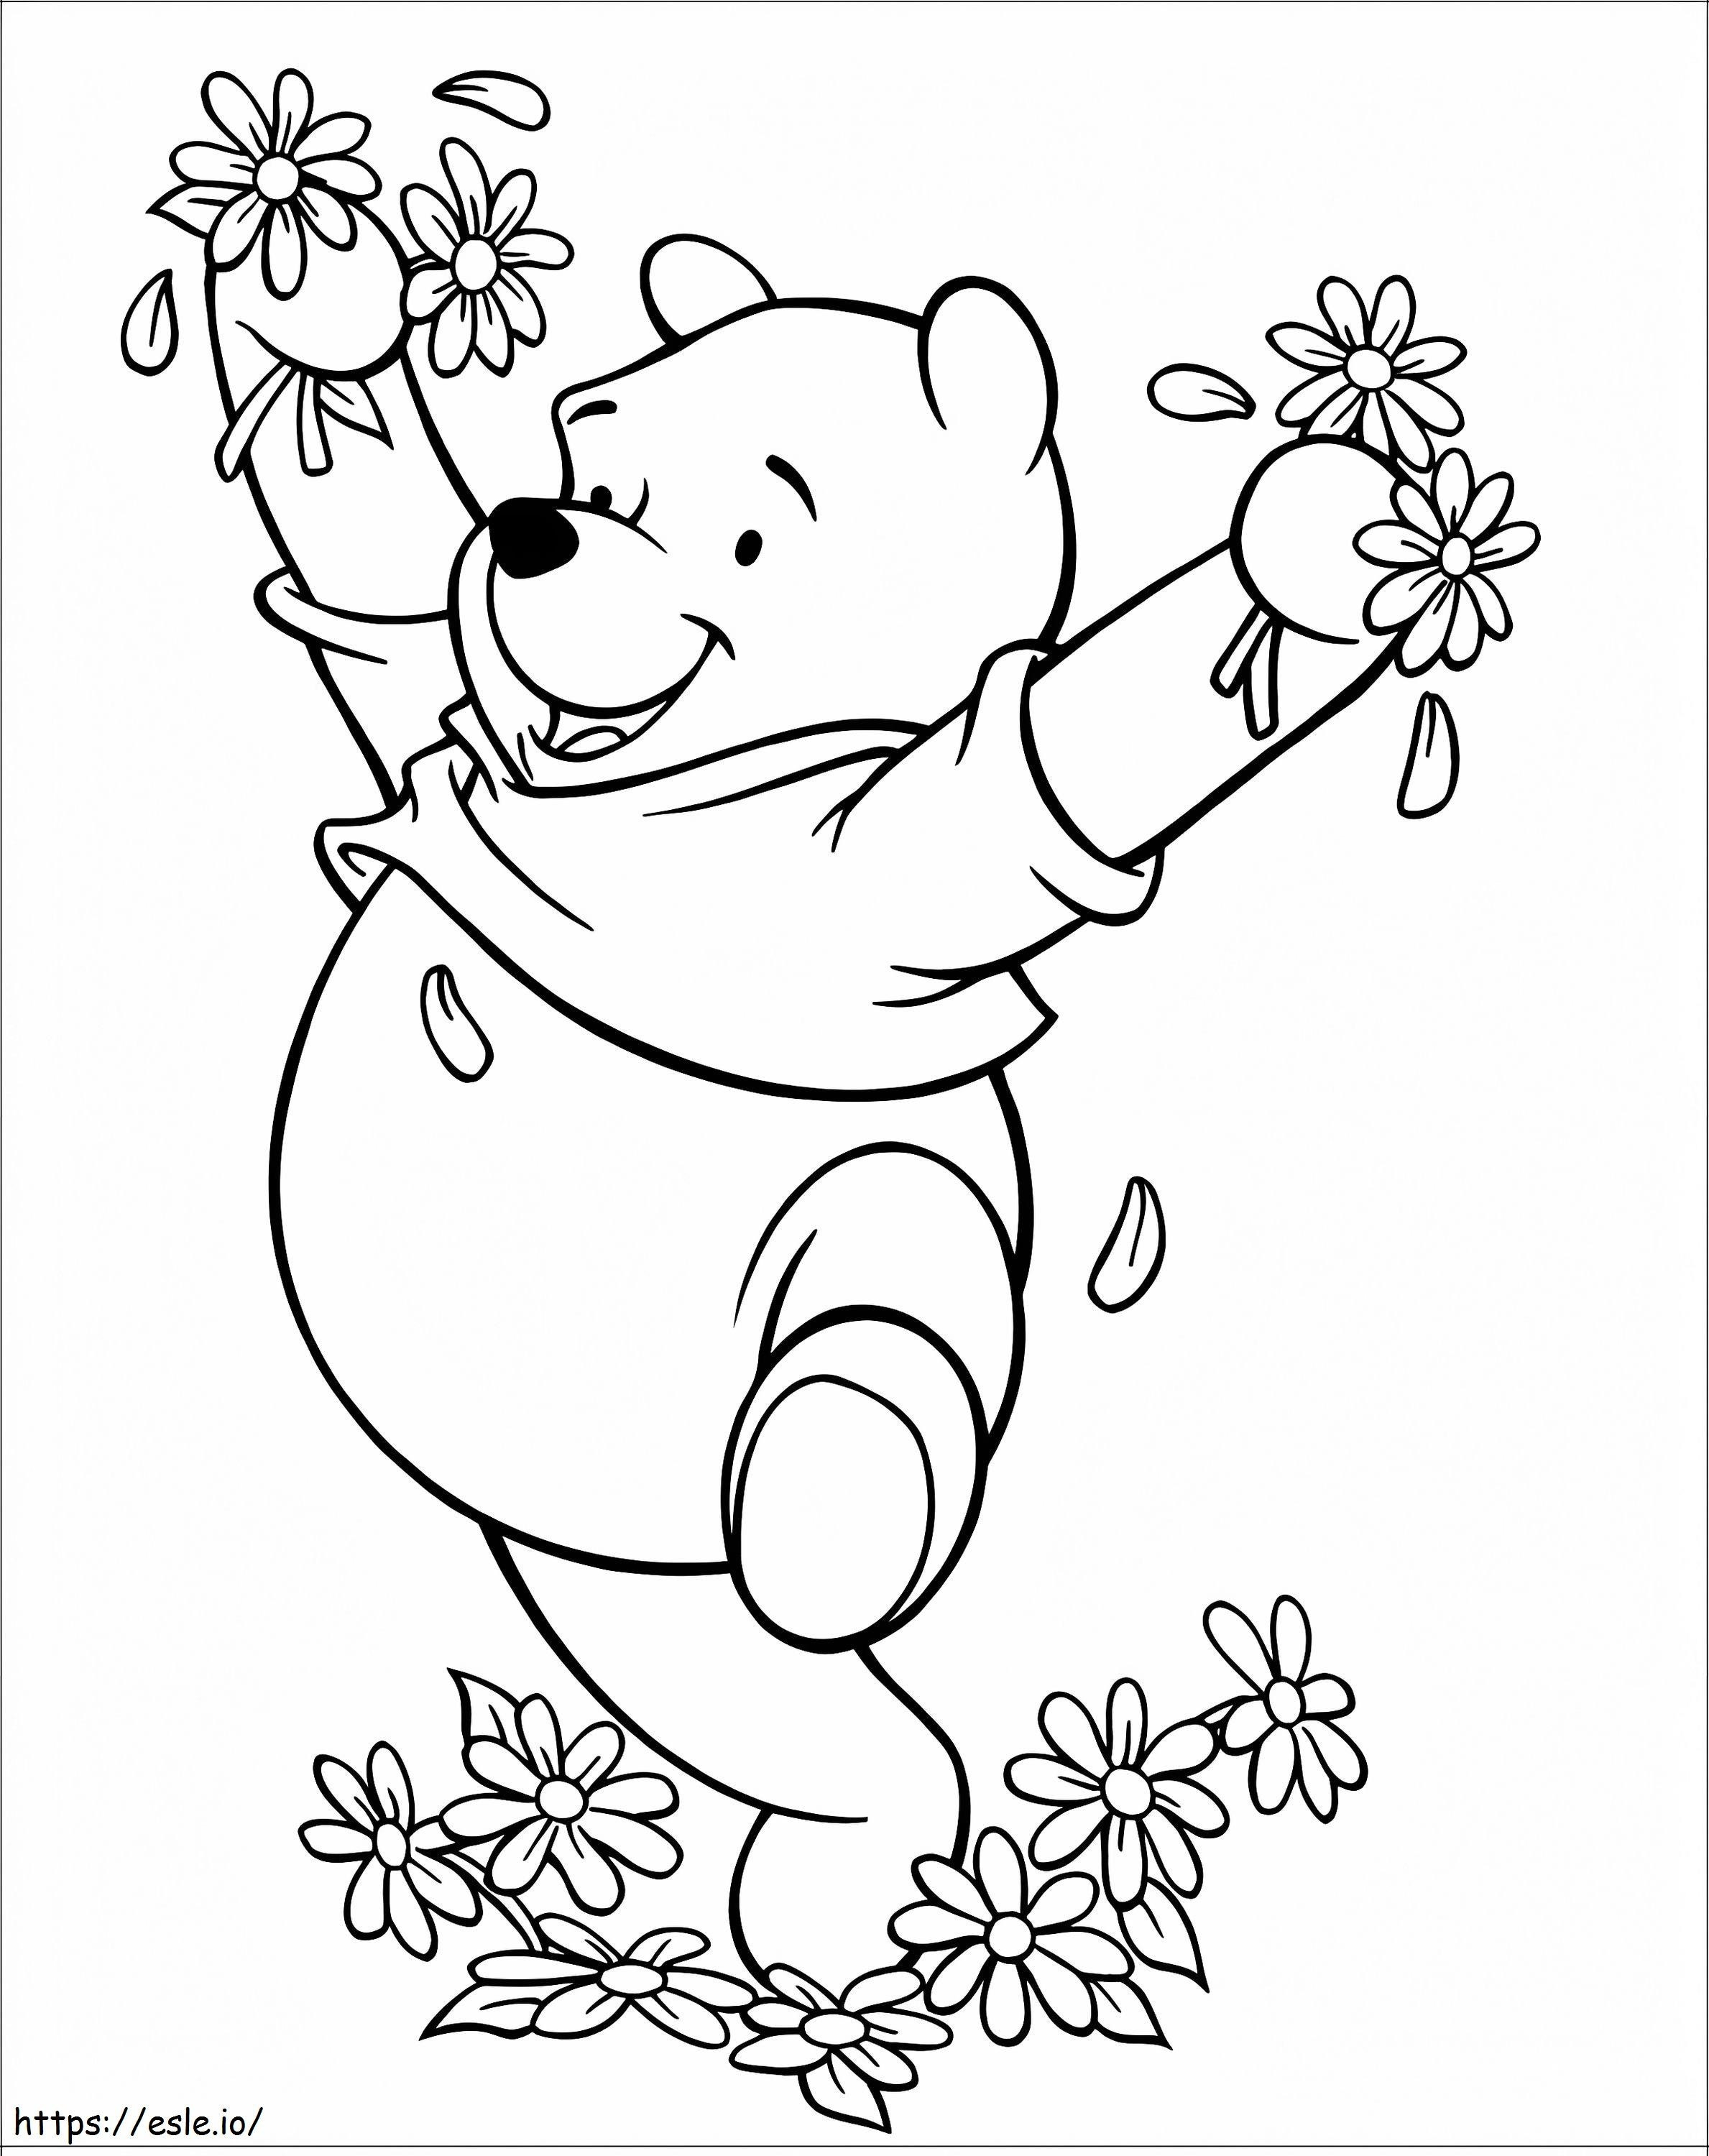 Happy Winnie Of The Pooh With Flowers coloring page